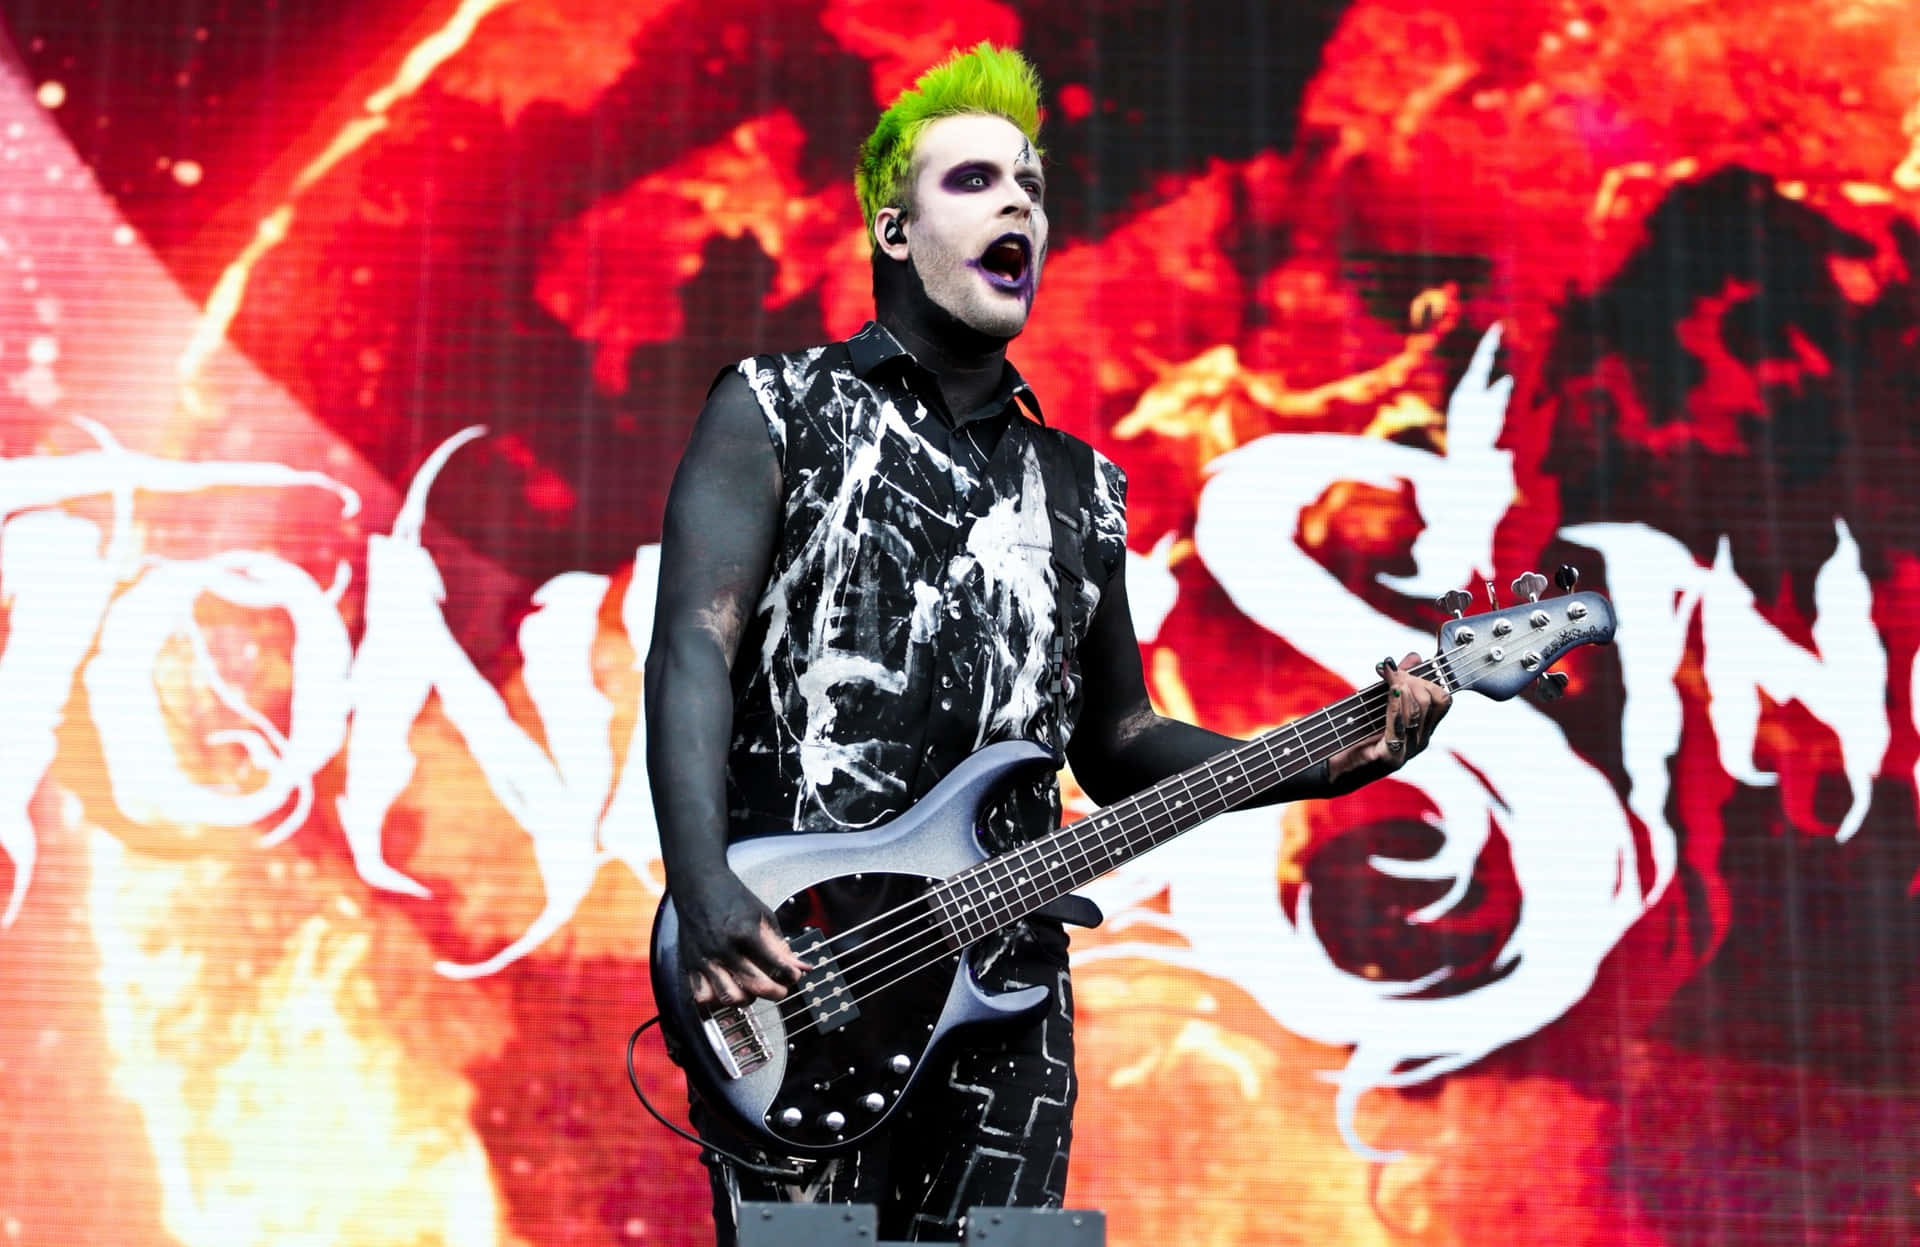 Green Haired Bassist On Stage.jpg Background